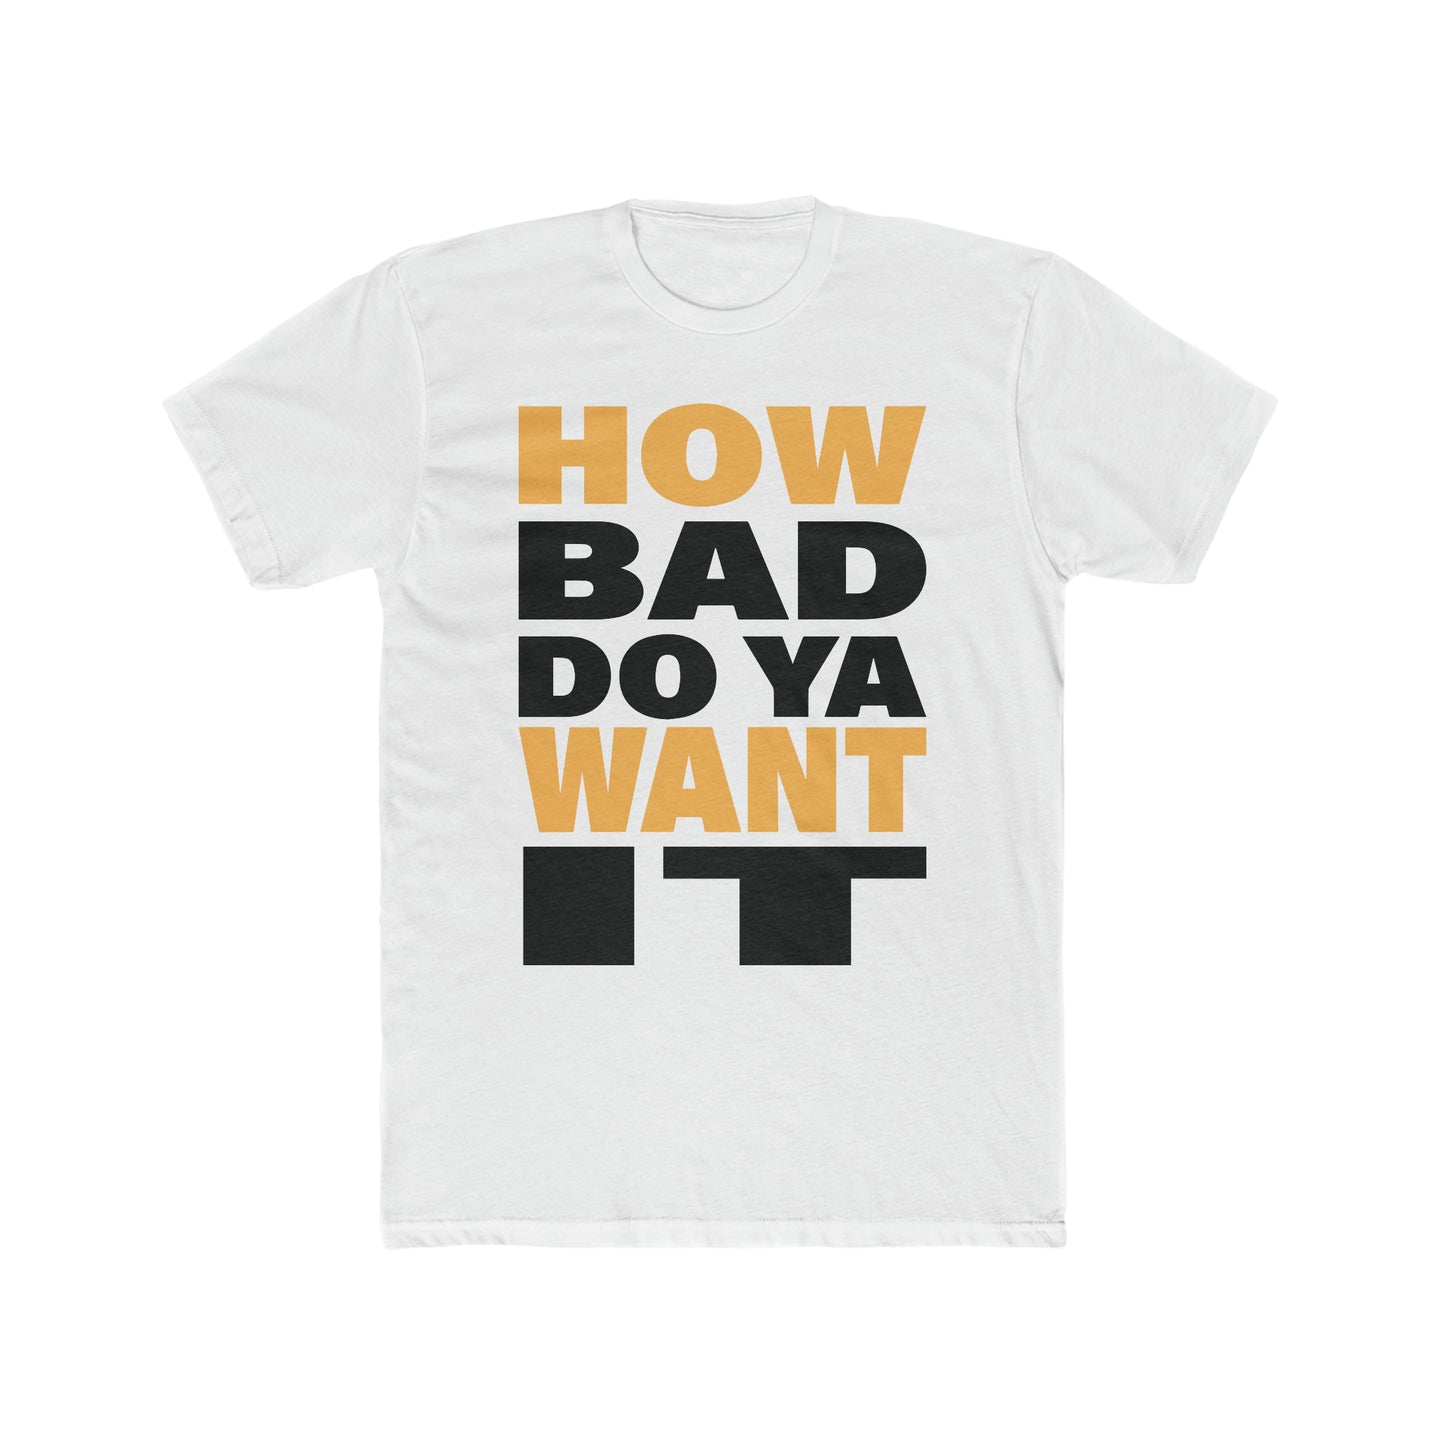 How Bad Do You Want It Cotton Tee